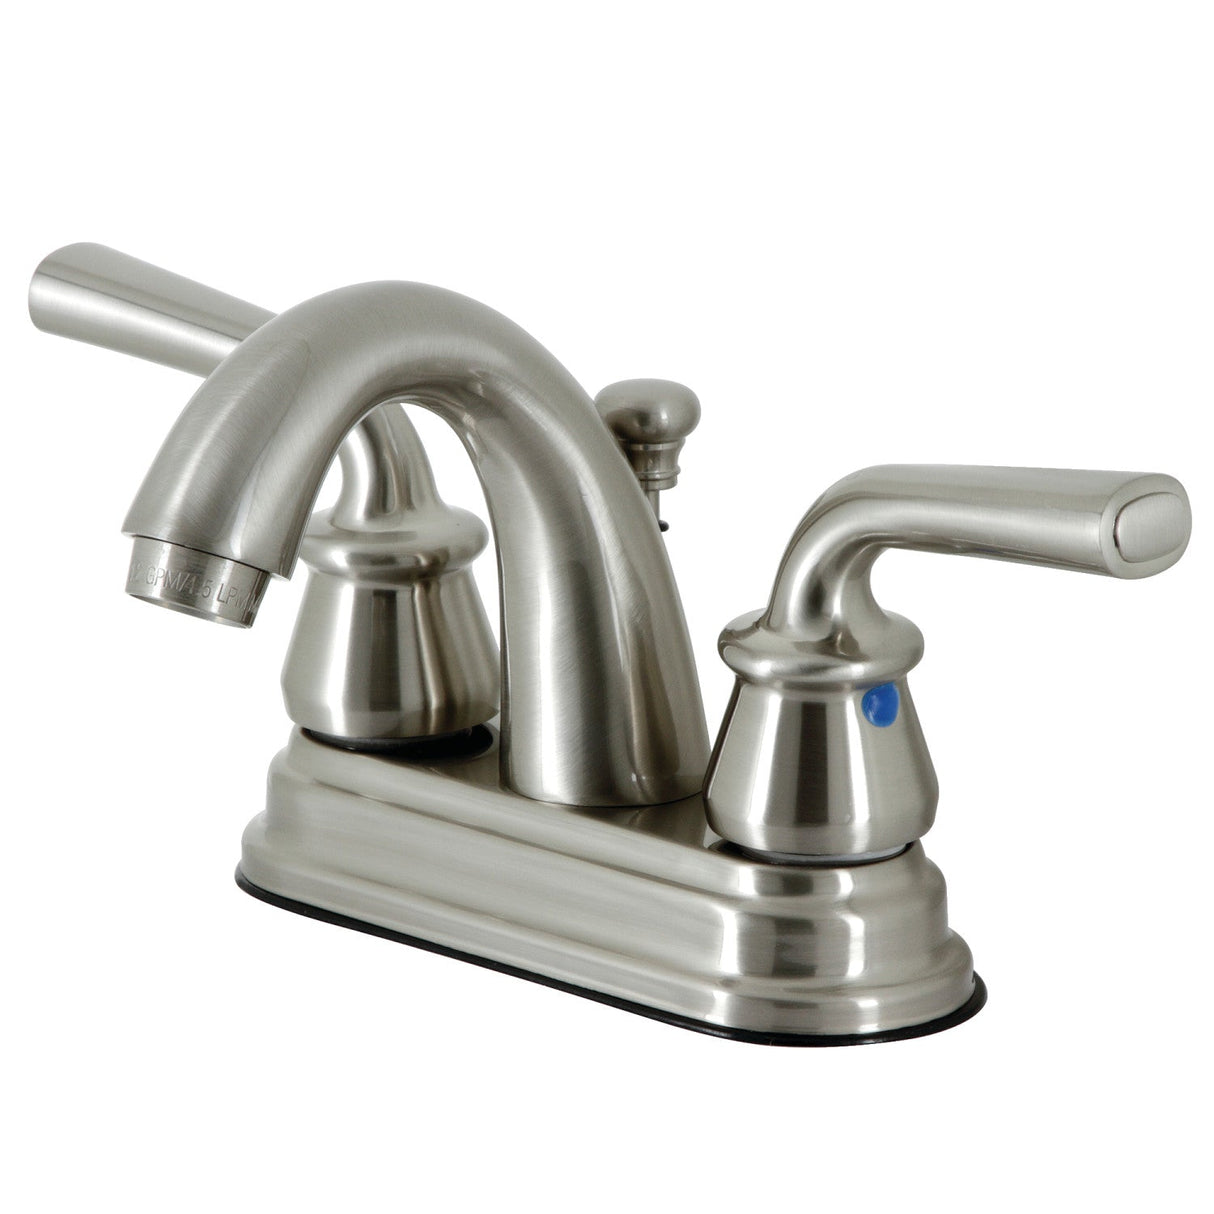 Restoration KB5618RXL Two-Handle 3-Hole Deck Mount 4" Centerset Bathroom Faucet with Plastic Pop-Up, Brushed Nickel